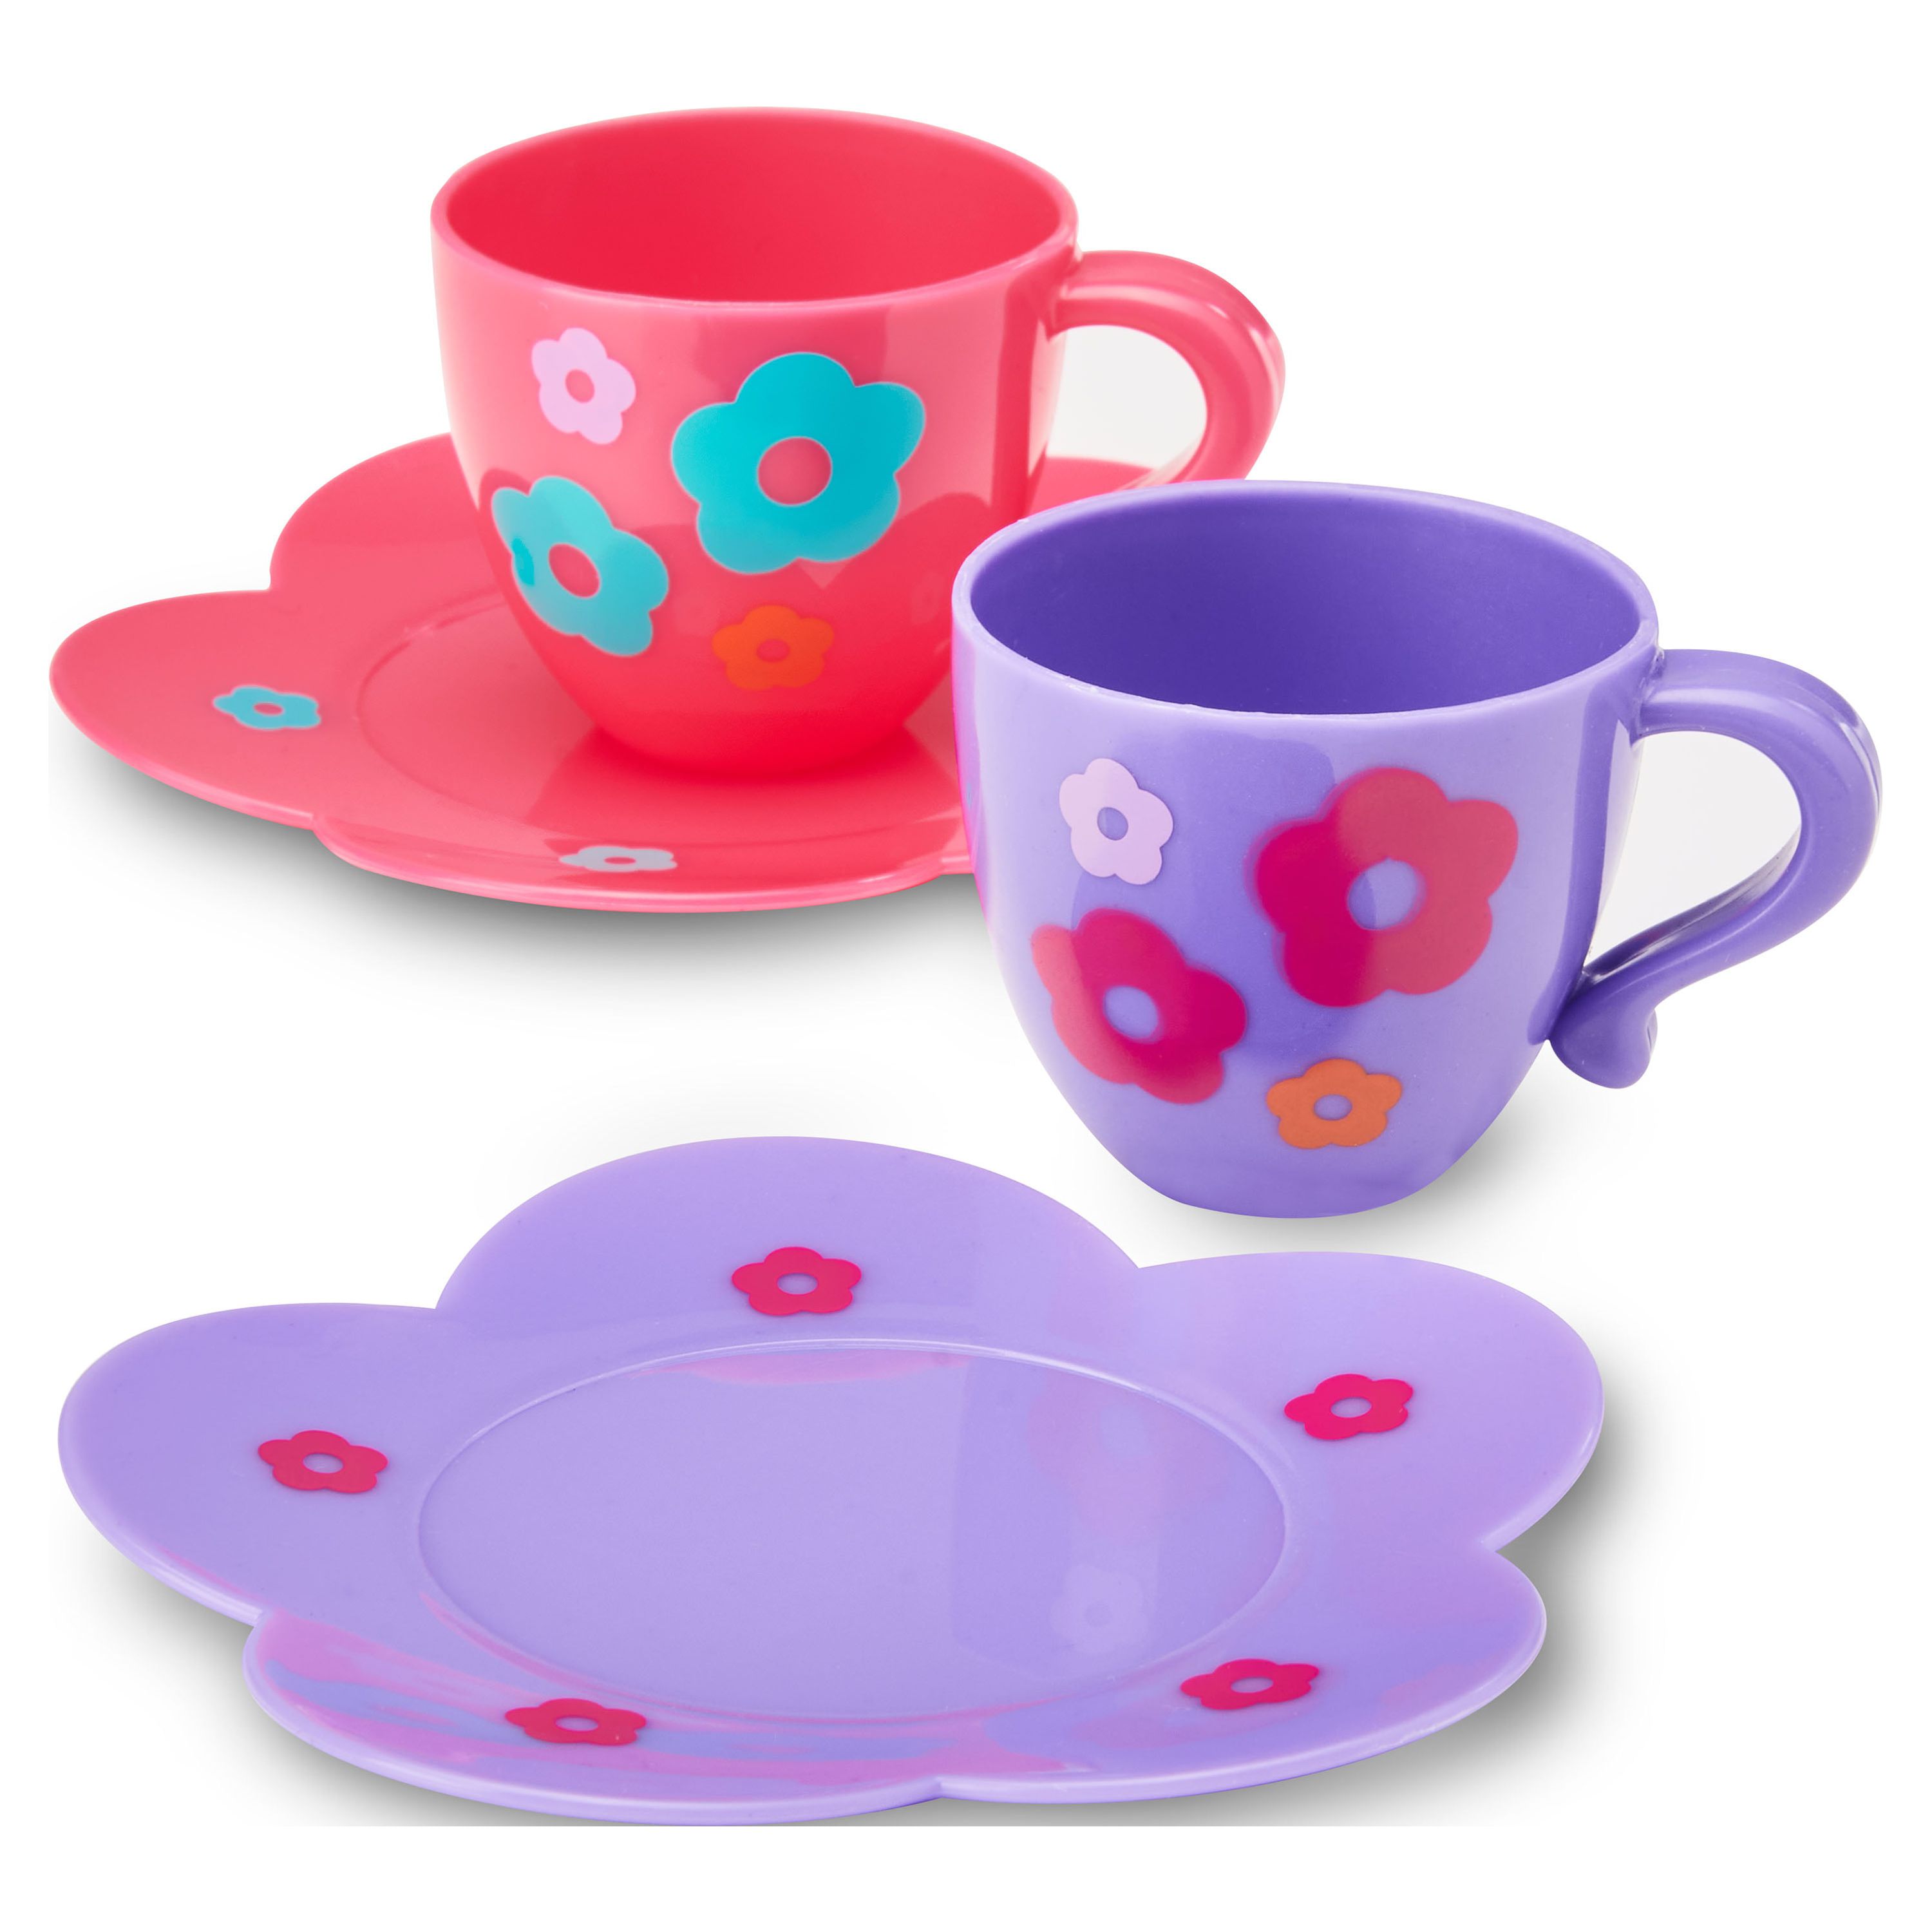 Kid Connection 18-Piece Tea Play Set - image 3 of 5